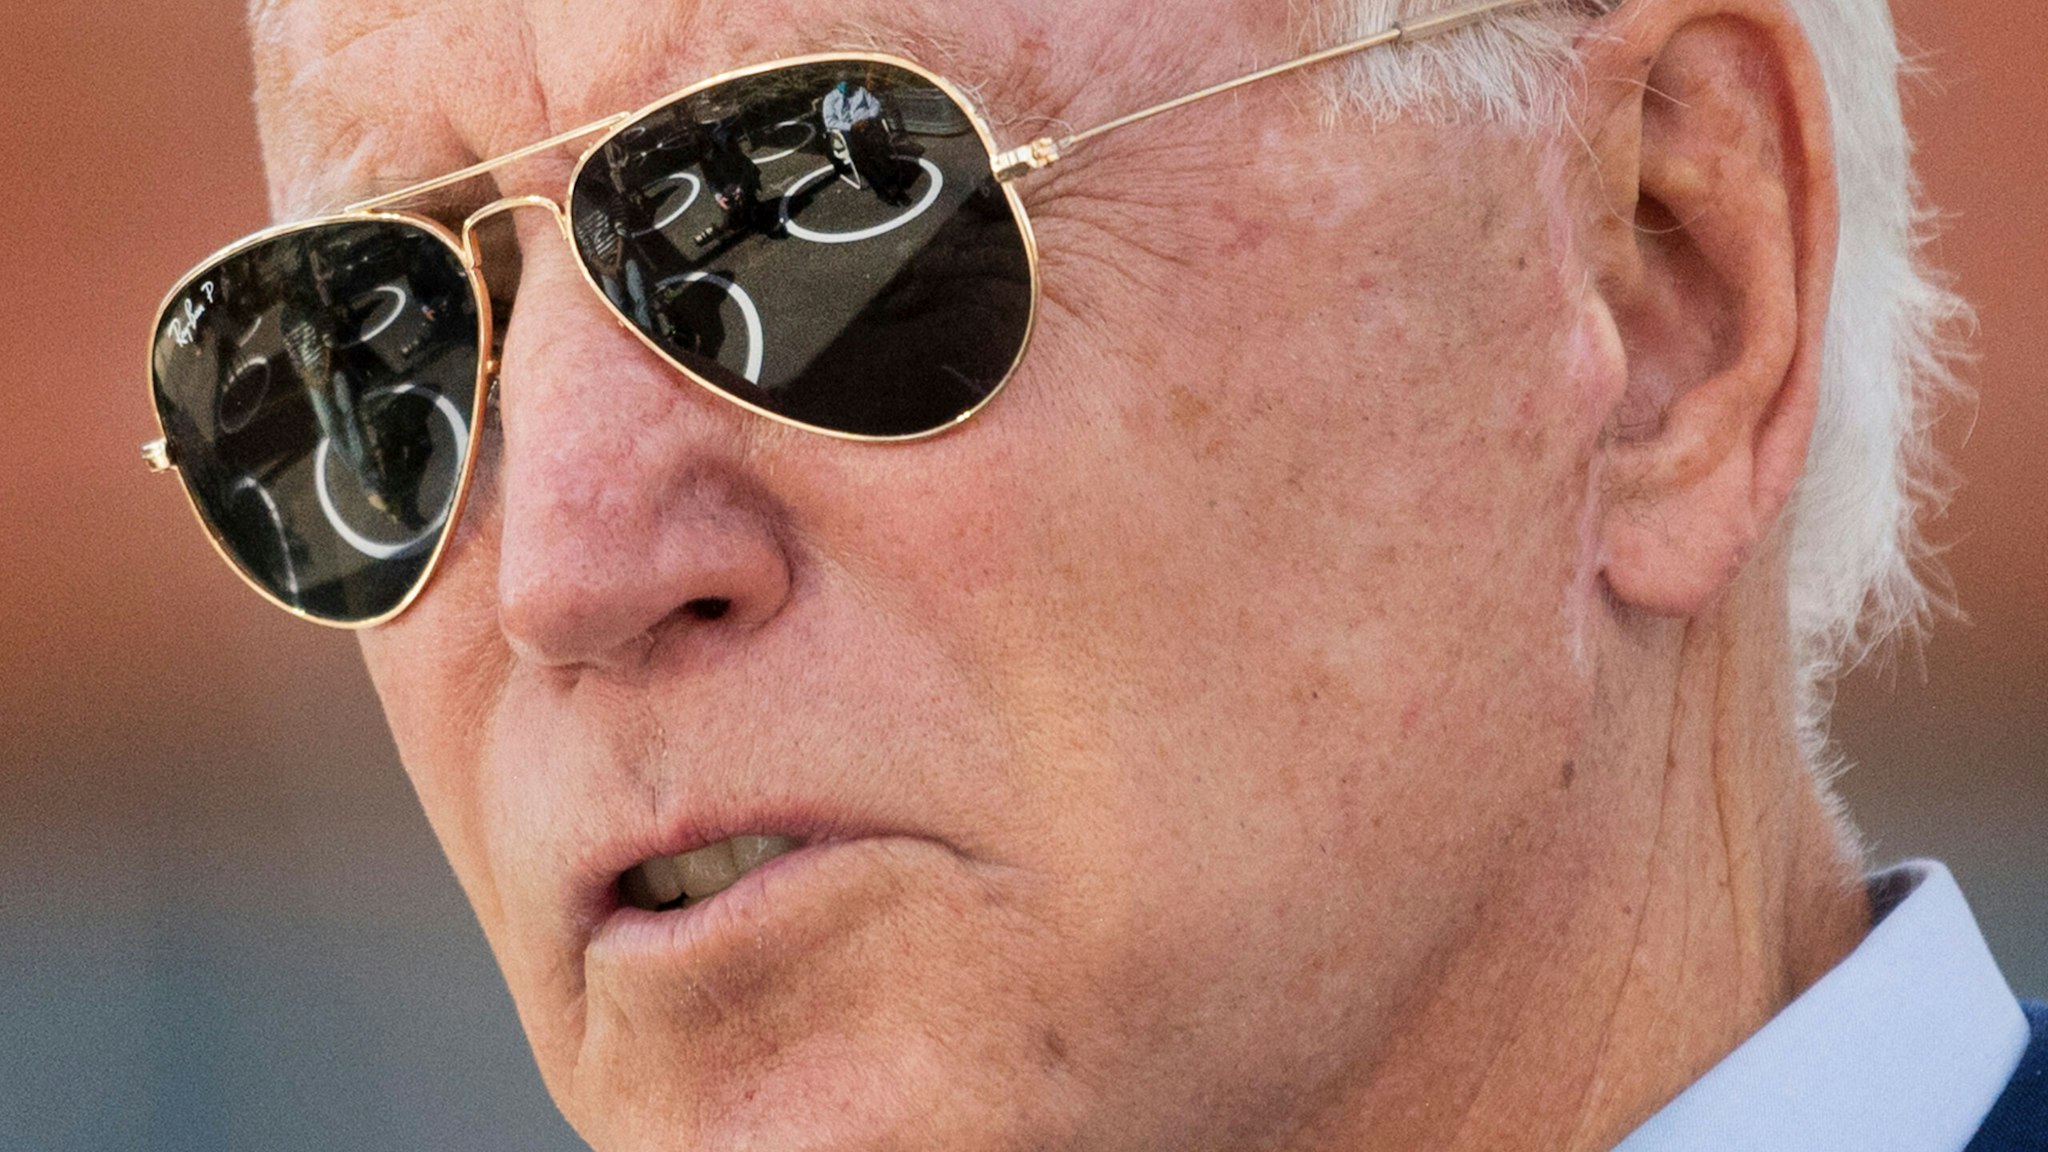 TOPSHOT - Socially distanced attendees are reflected in Democratic presidential candidate Joe Biden's sunglasses as he speaks at the Black Economic Summit at Camp North End in Charlotte, North Carolina, on September 23, 2020.